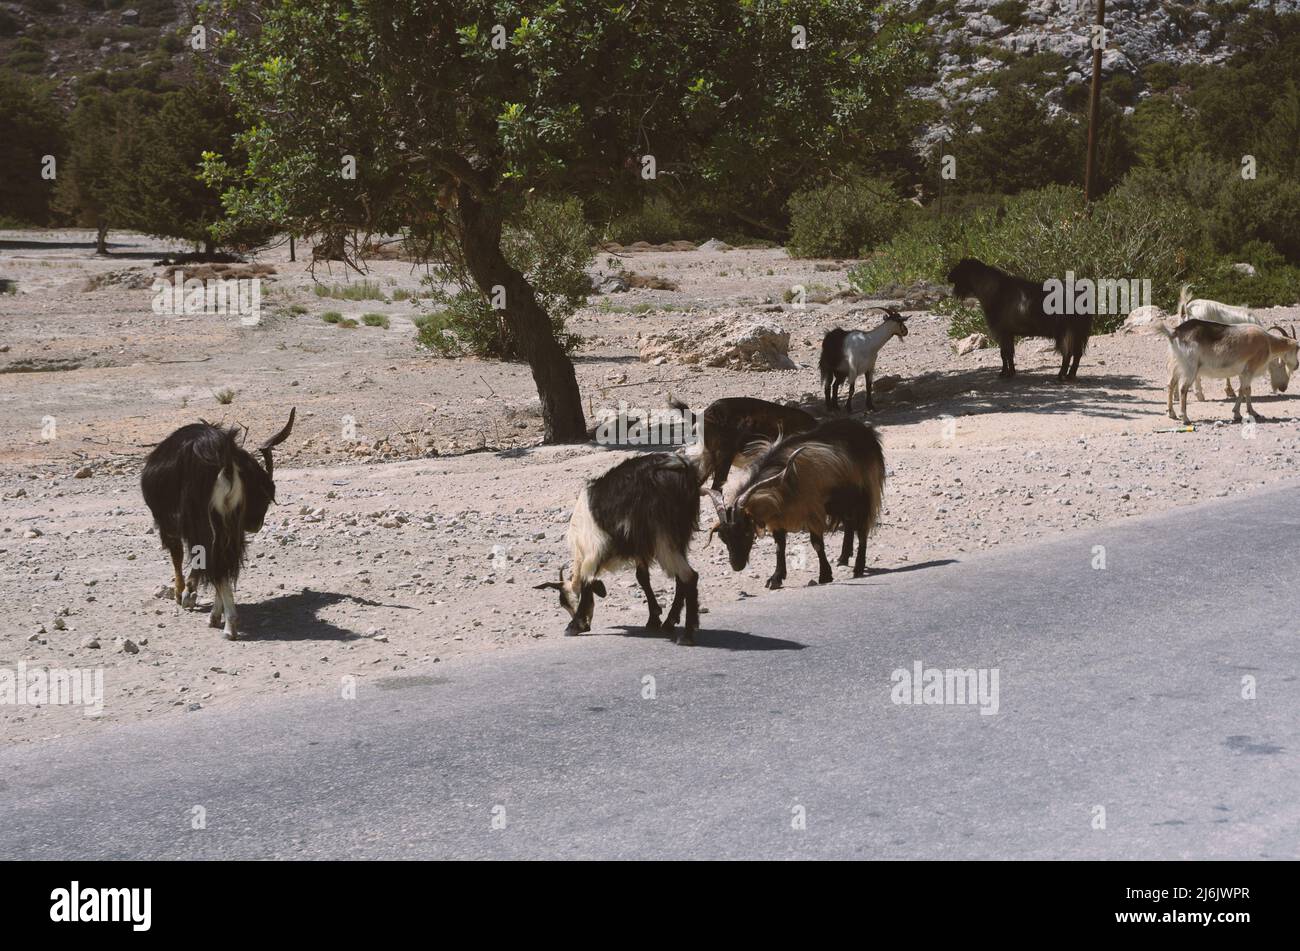 Shaggy goats on the side of an asphalt road in a grassless area (Rhodes, Greece) Stock Photo